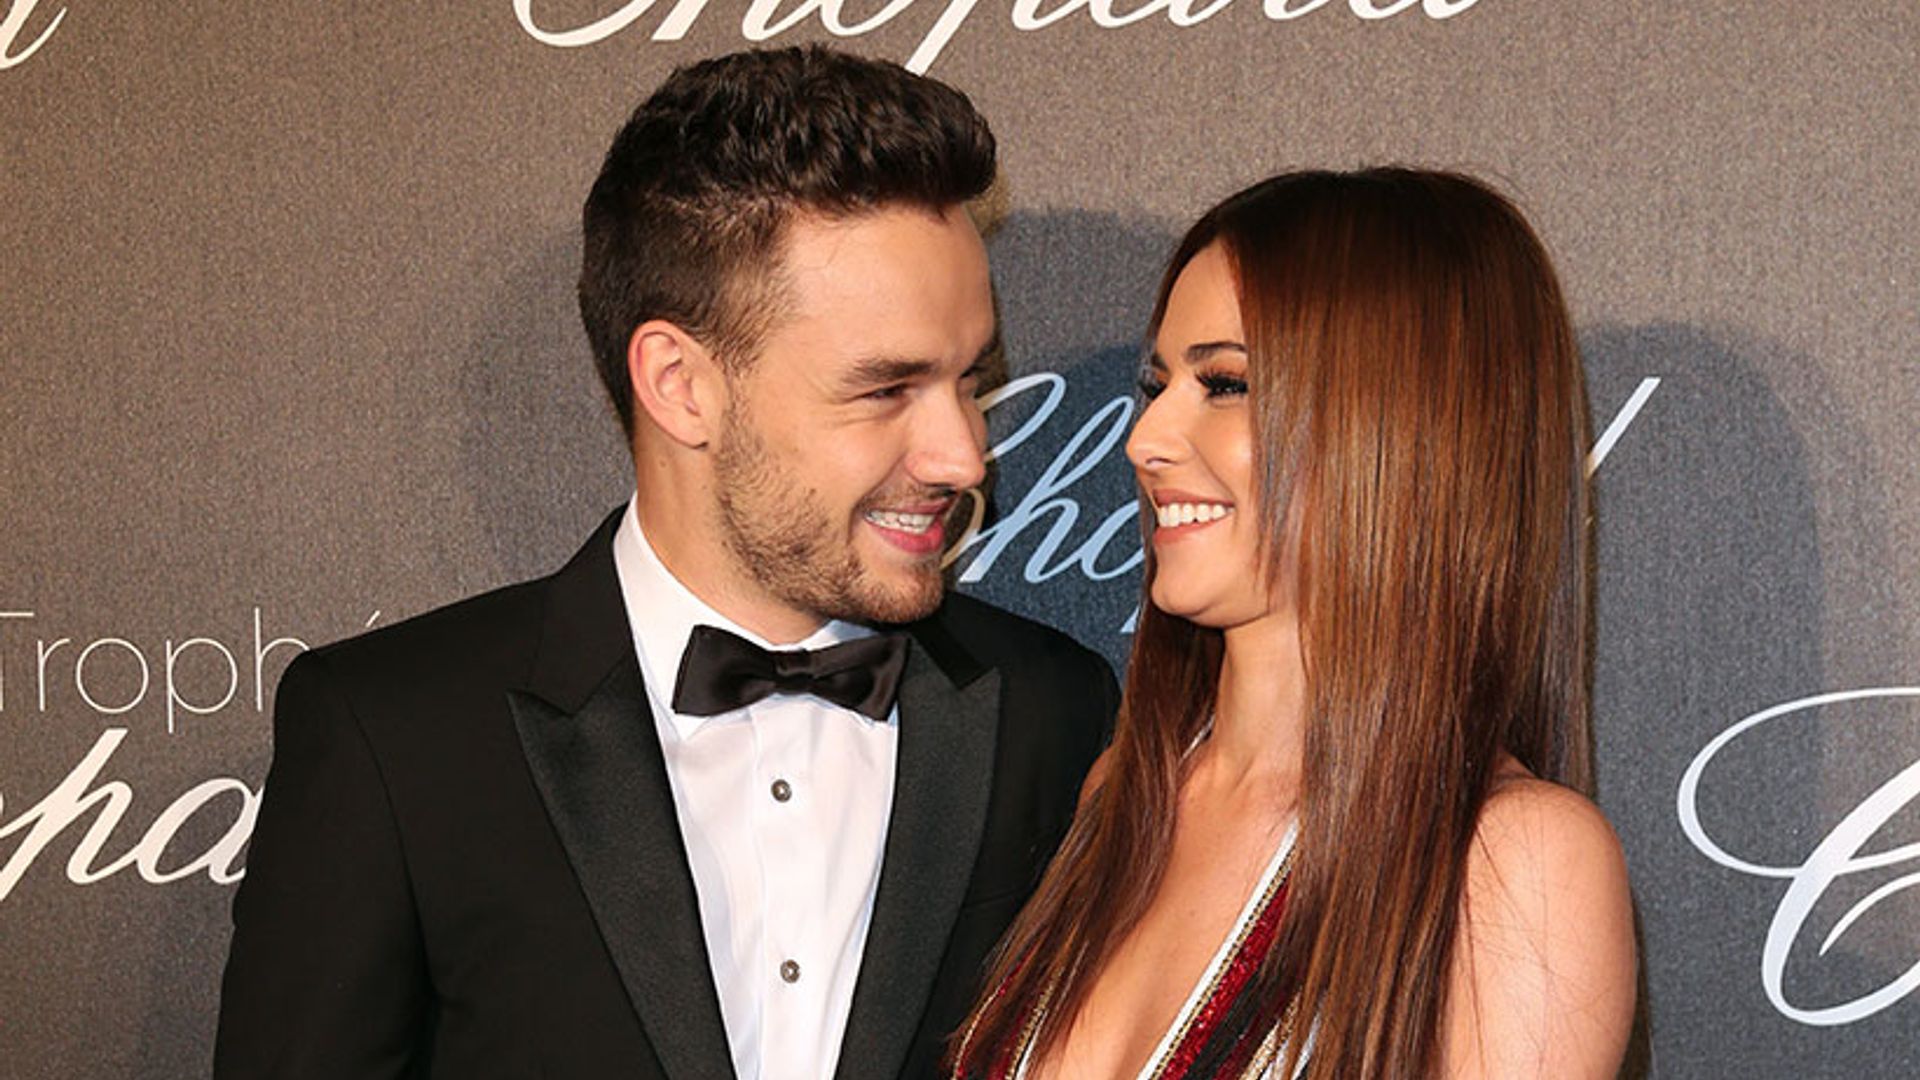 Justin Bieber says he wants an invite to Cheryl and Liam's wedding